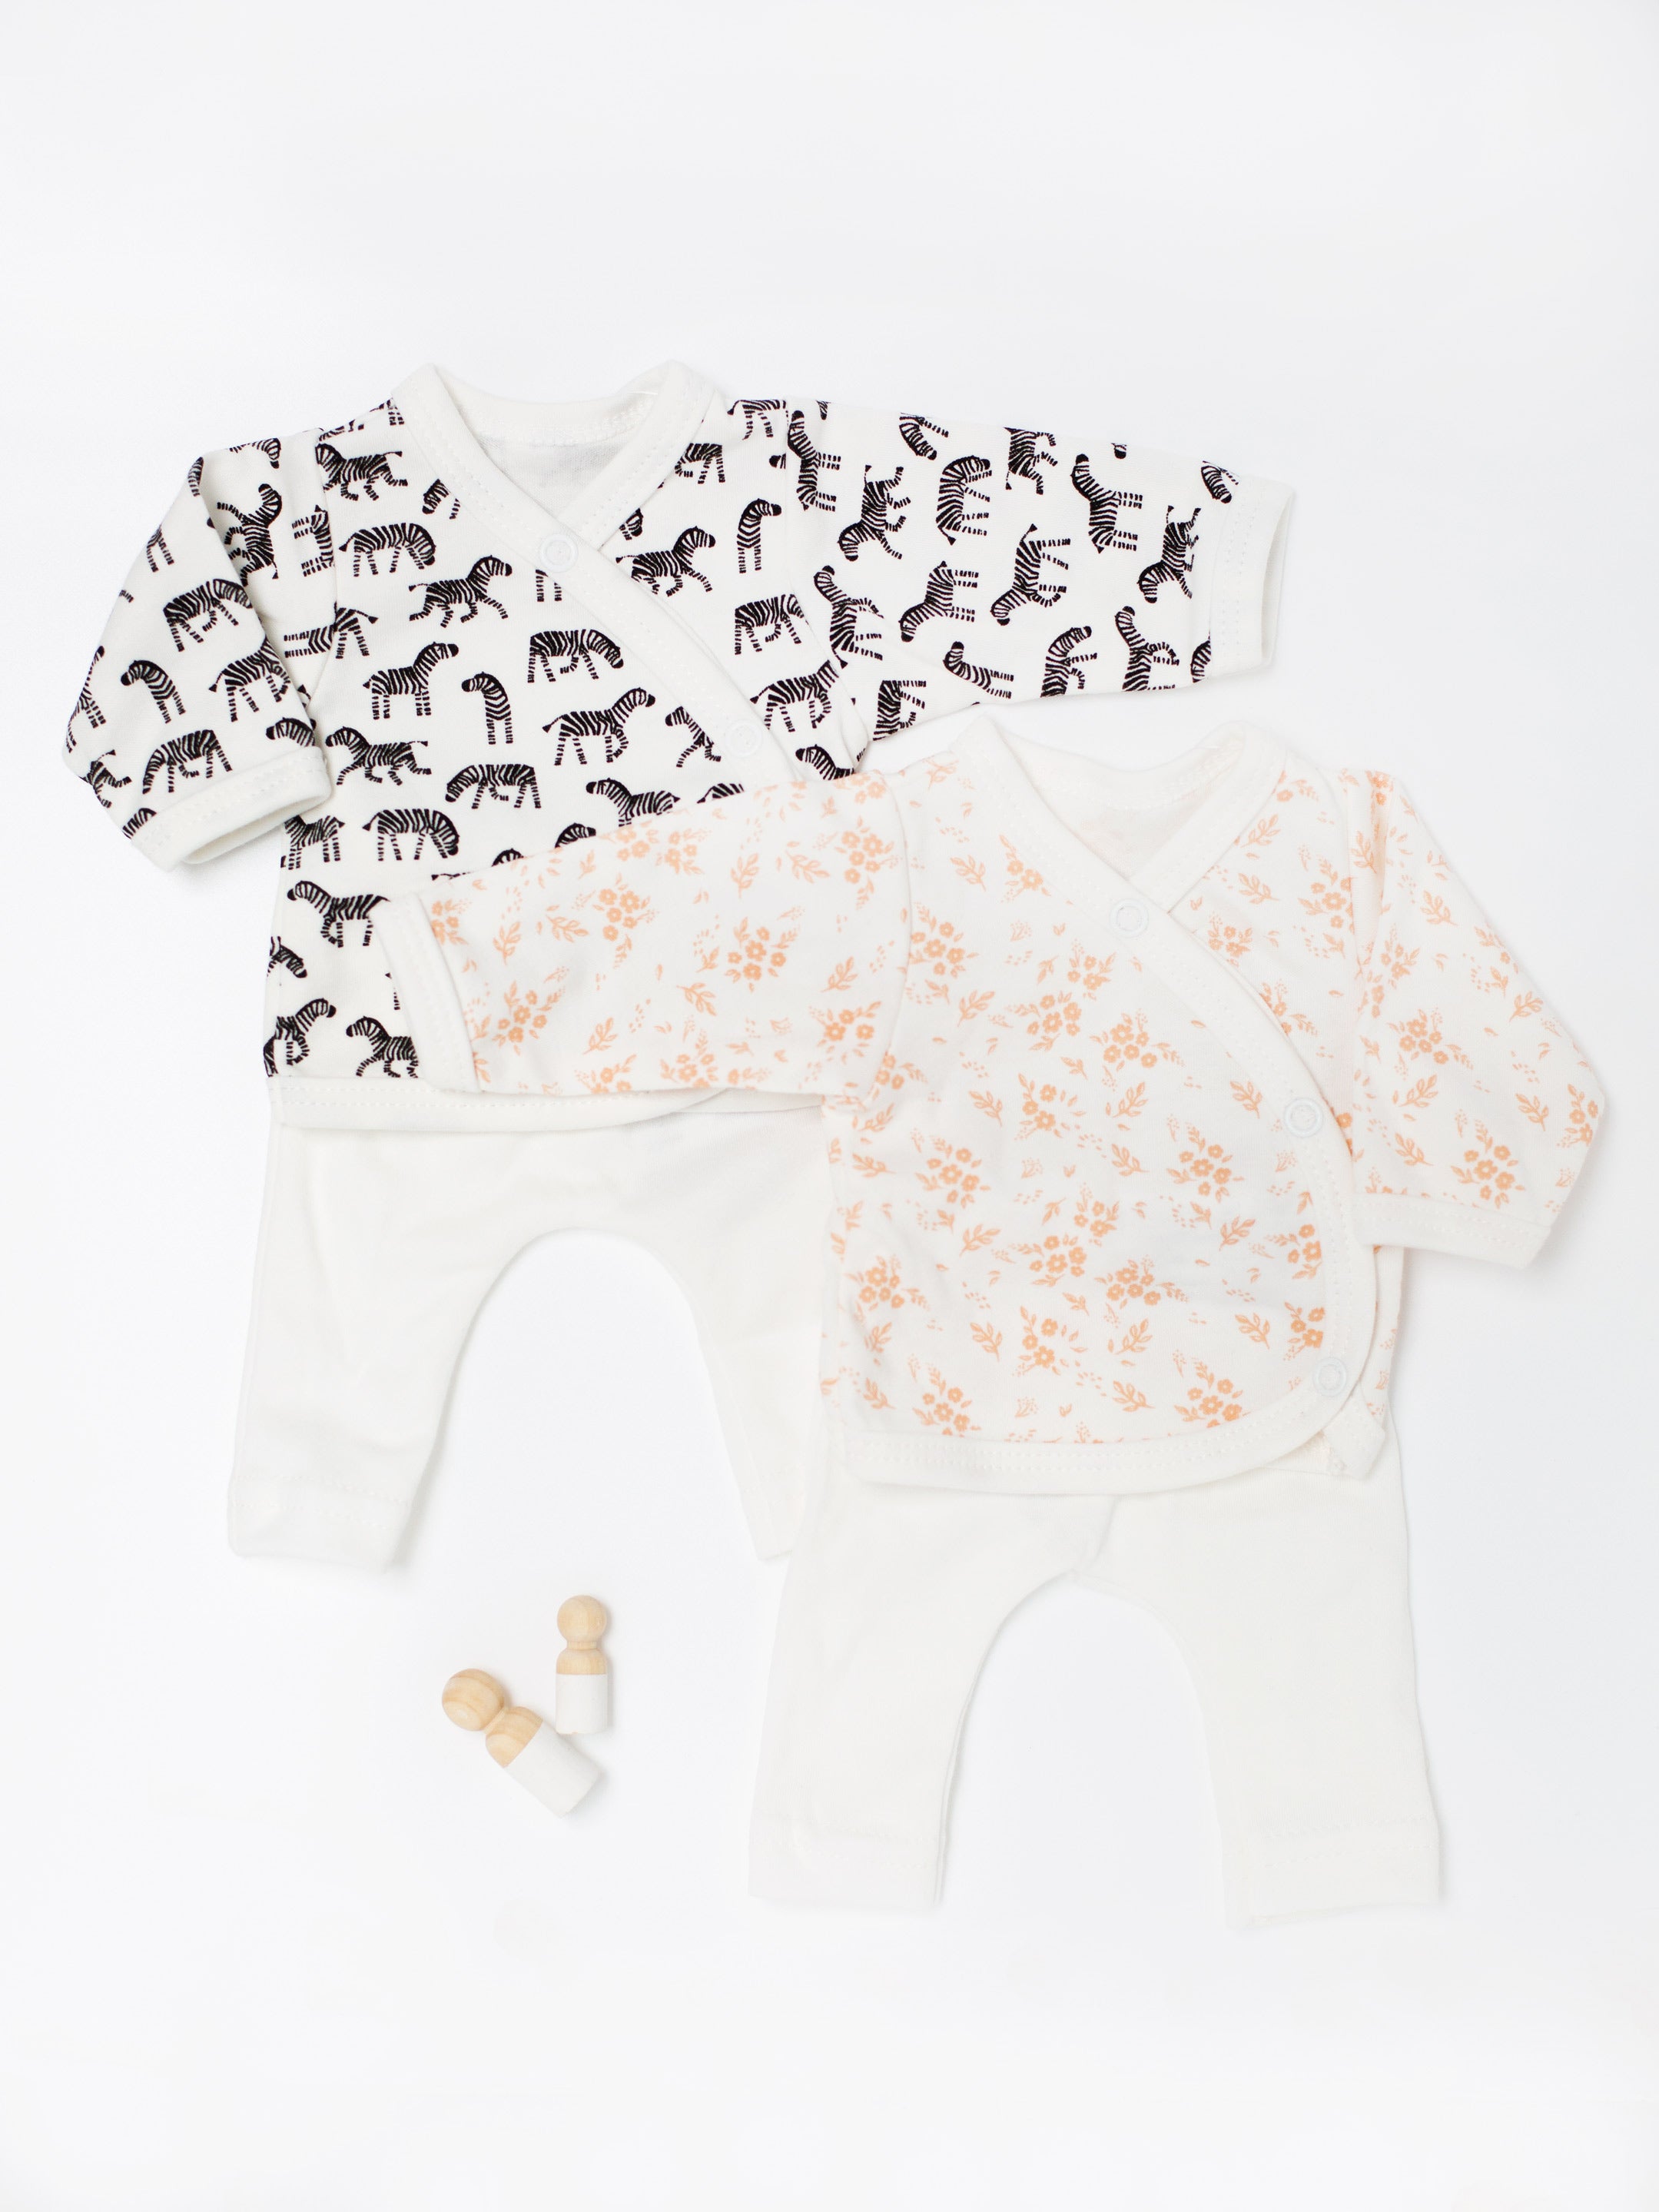 Twin Bundle - 2 piece sets in Little Zebras & Apricot Floral Print, Organic Cotton Set/Multipack Tiny & Small 